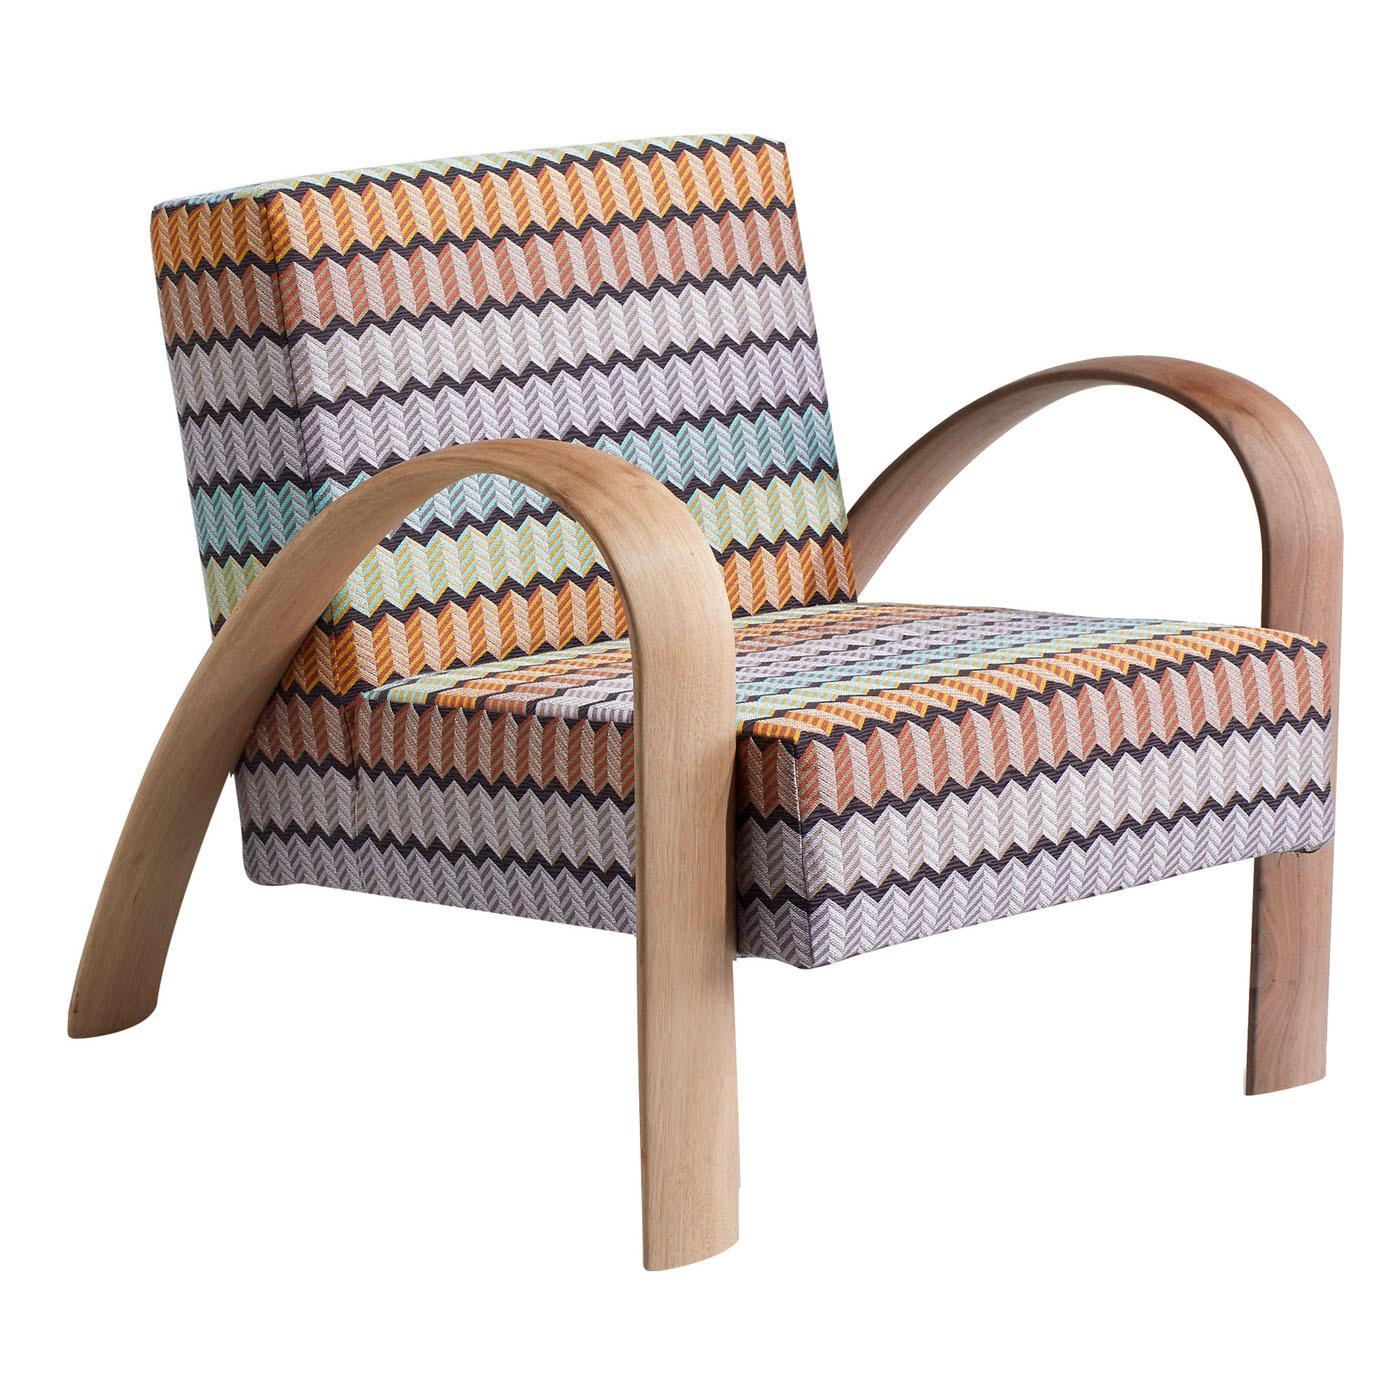 Immediately recognizable to all fans of the iconic maison, the Grandma armchair by Missoni Home brings past and present together in an essential design. Characterized by its original juxtaposition of curved armrests and the squared backrest, the